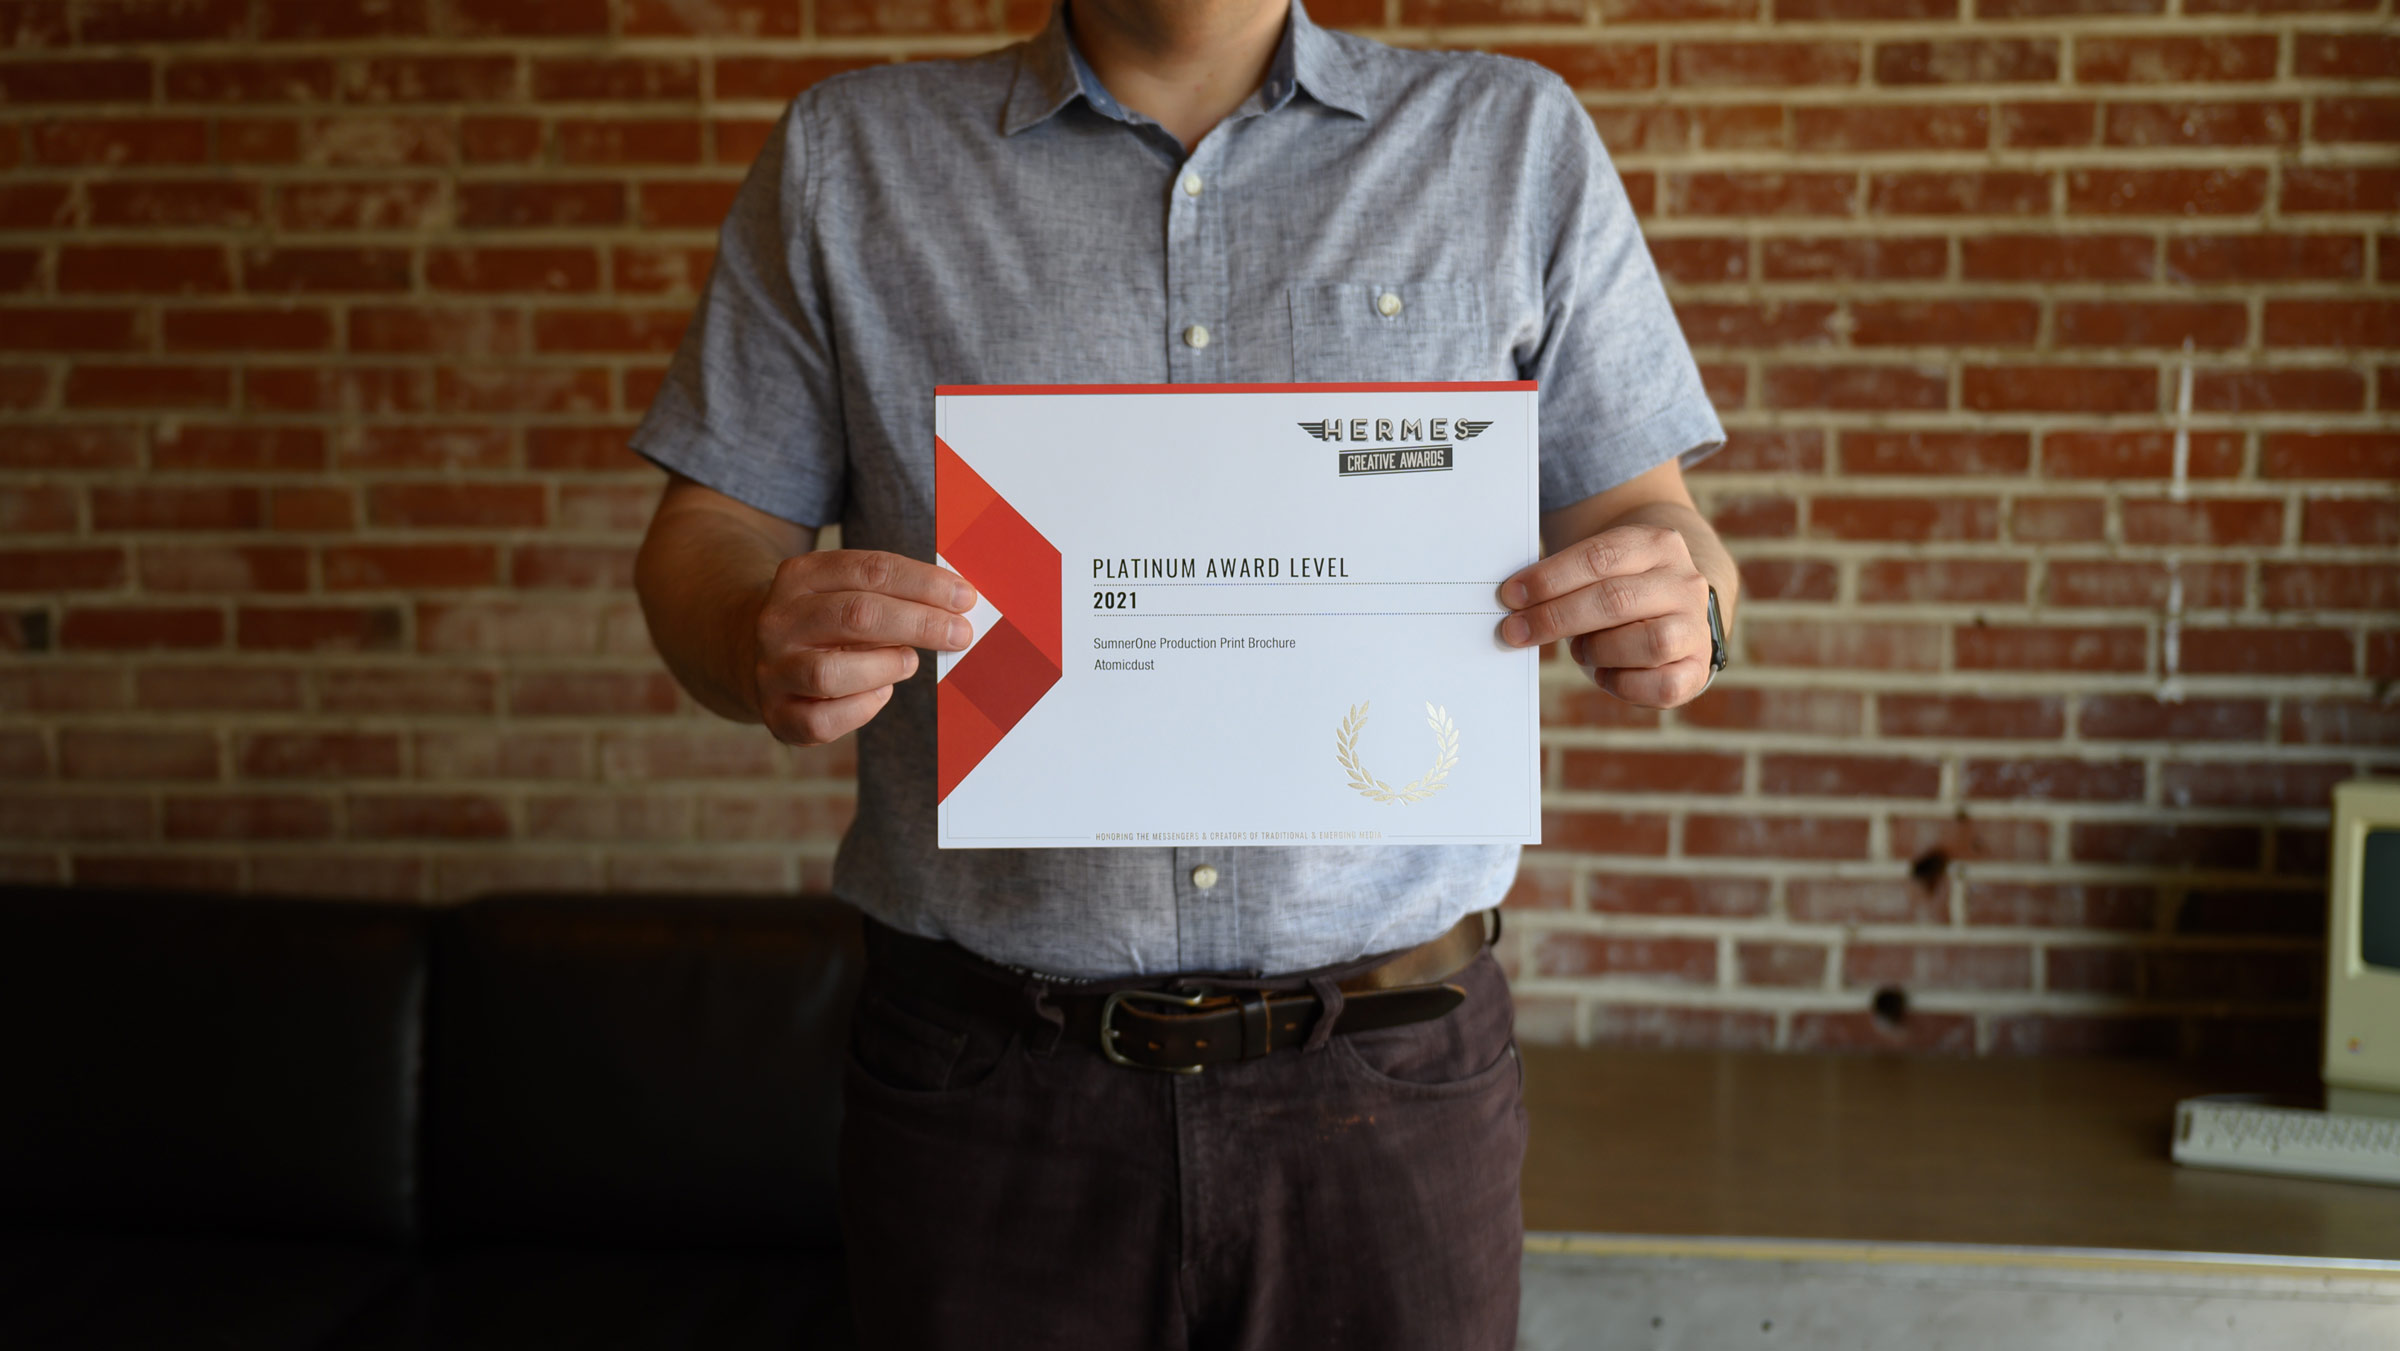 An Atomicdust team member holds the Hermes Creative Awards certificates